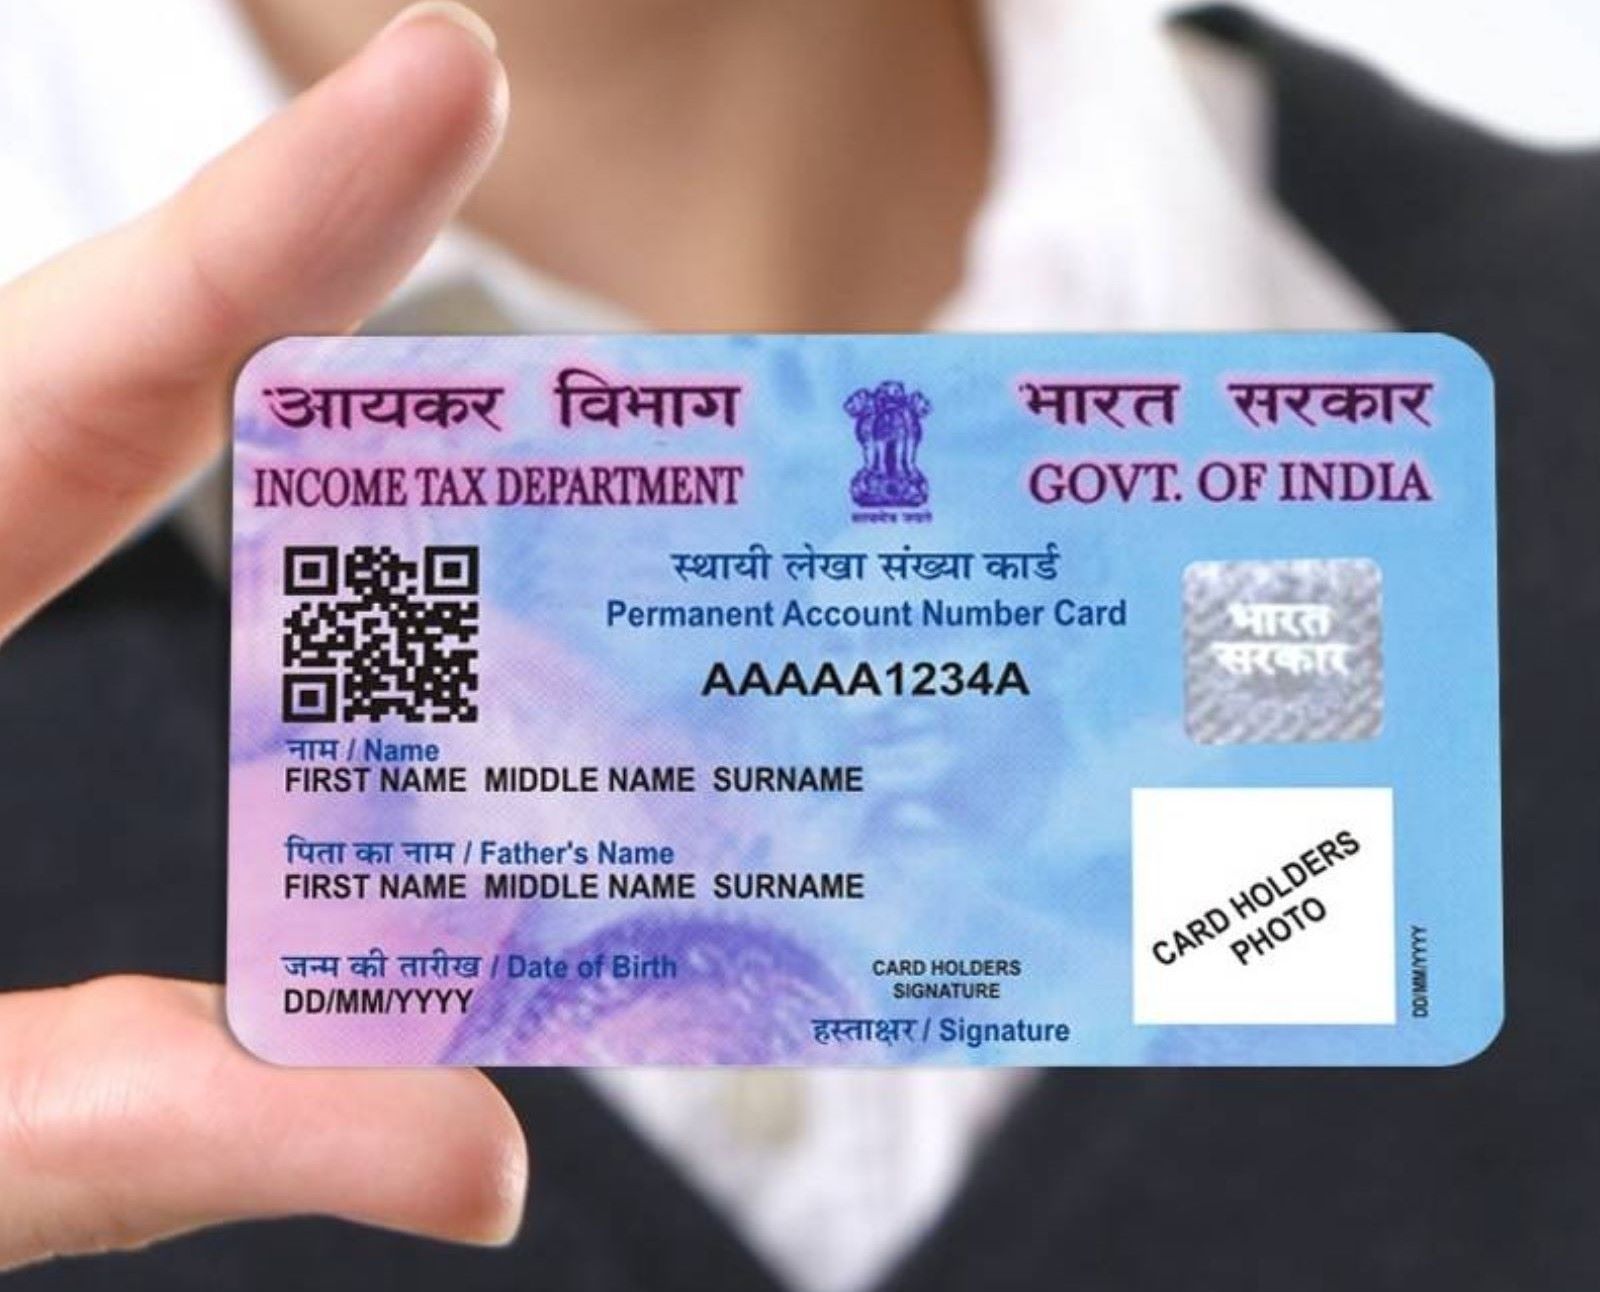 Union Budget 2023-24 Pan card will be the common identifier in India